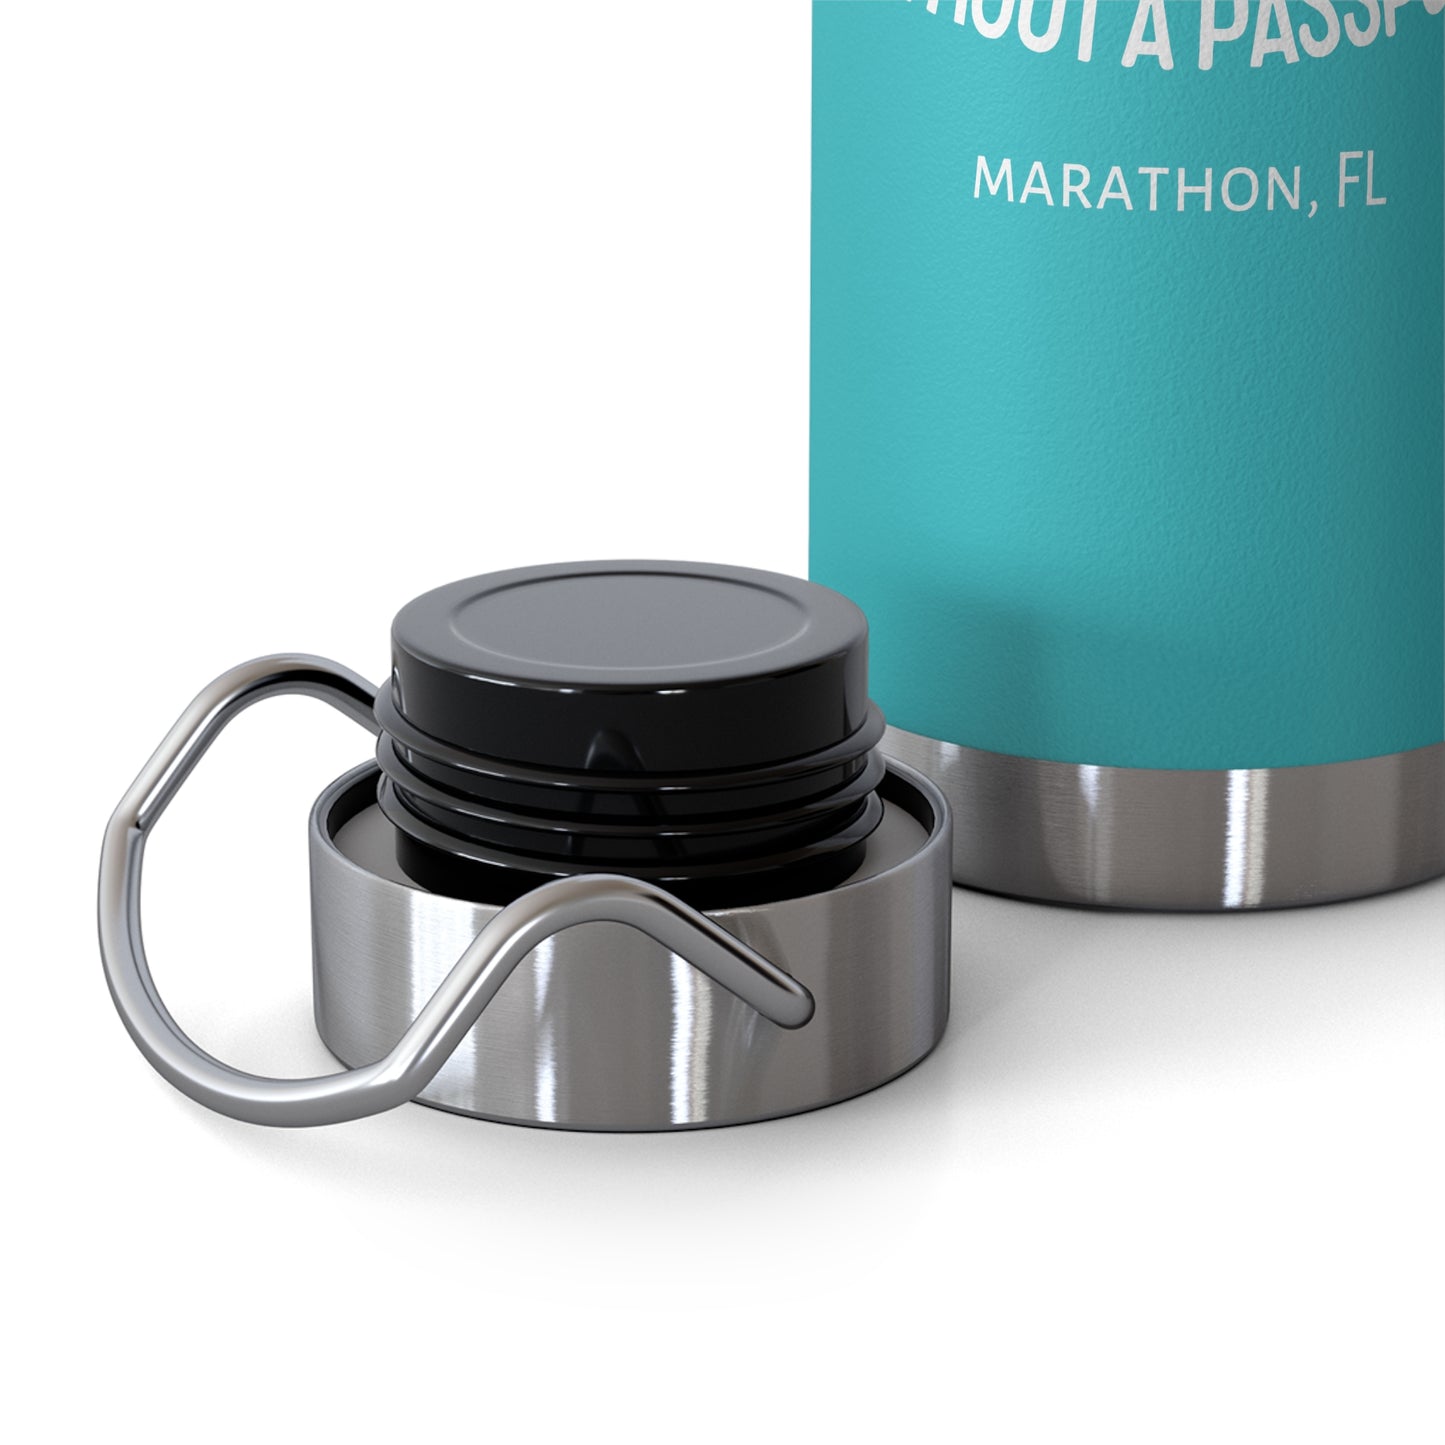 "paradise without a passport" - insulated water bottle, white logo